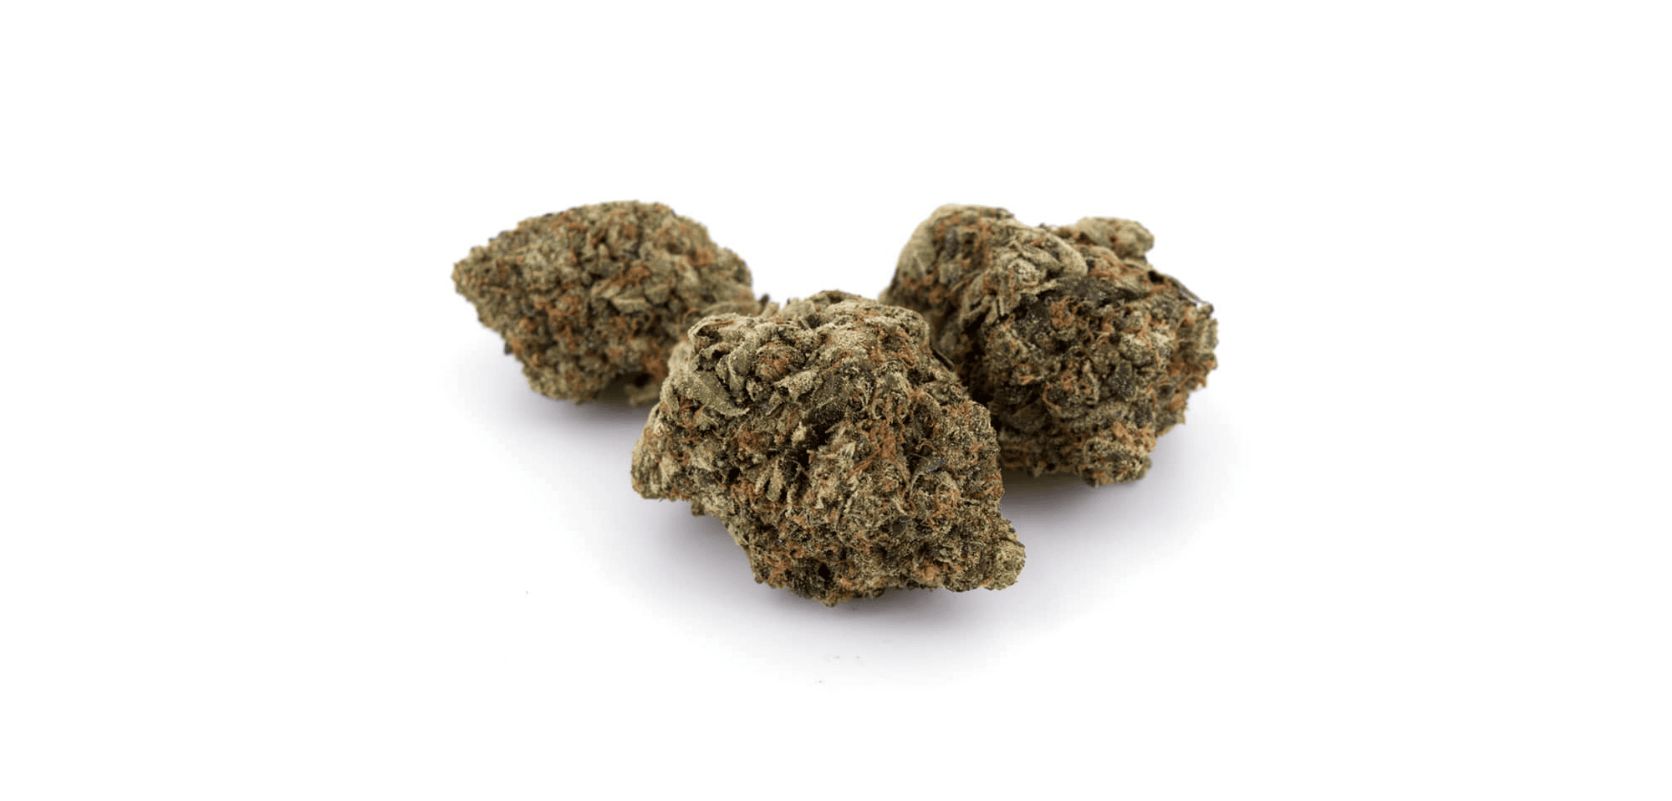 Buy Death Bubba strain from an outstanding online weed dispensary and receive a bud with around 27 percent THC or more!